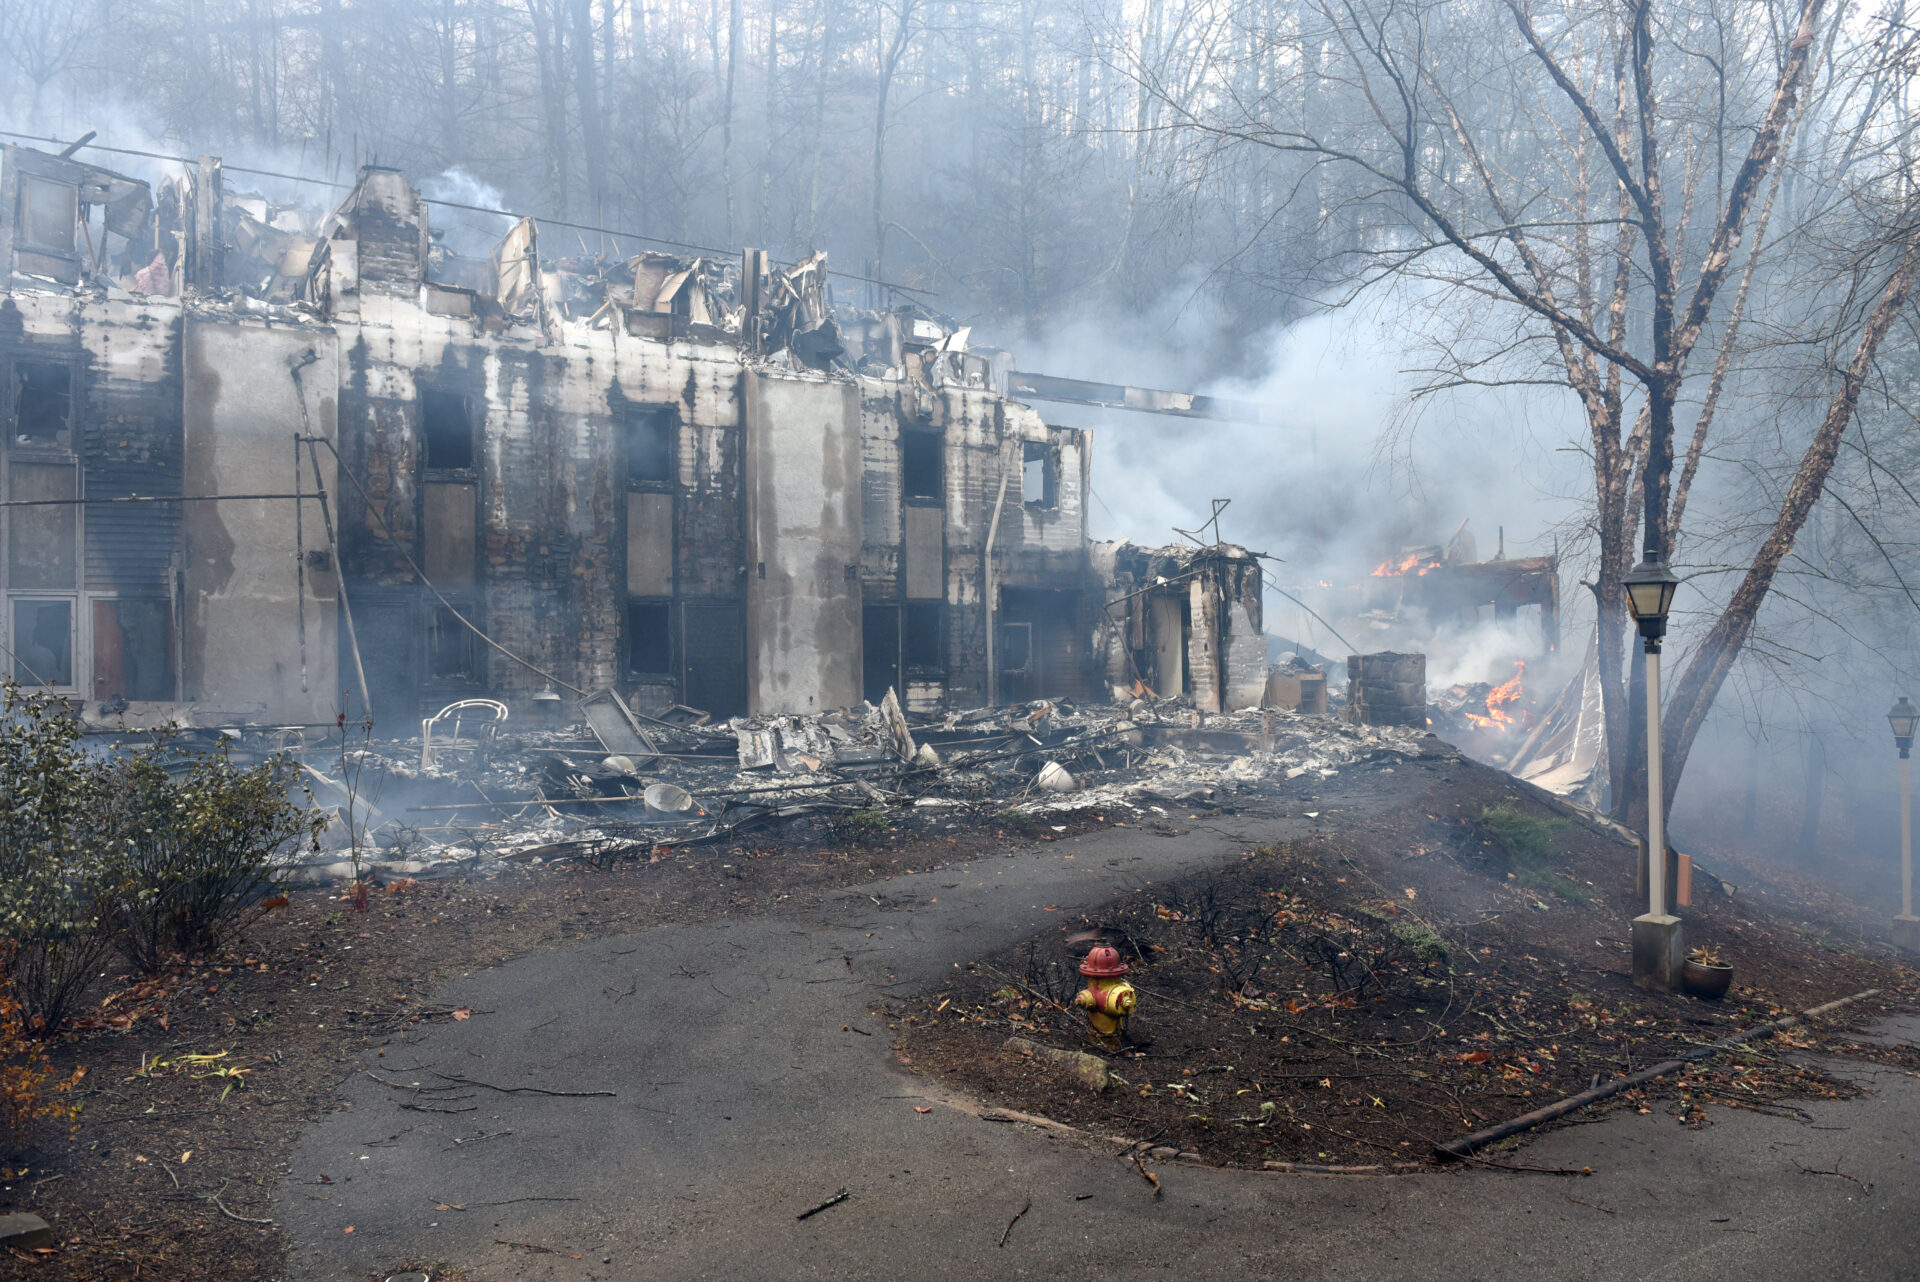 News Investigation Reveals Missteps In Response To 2016 Smokies Fire